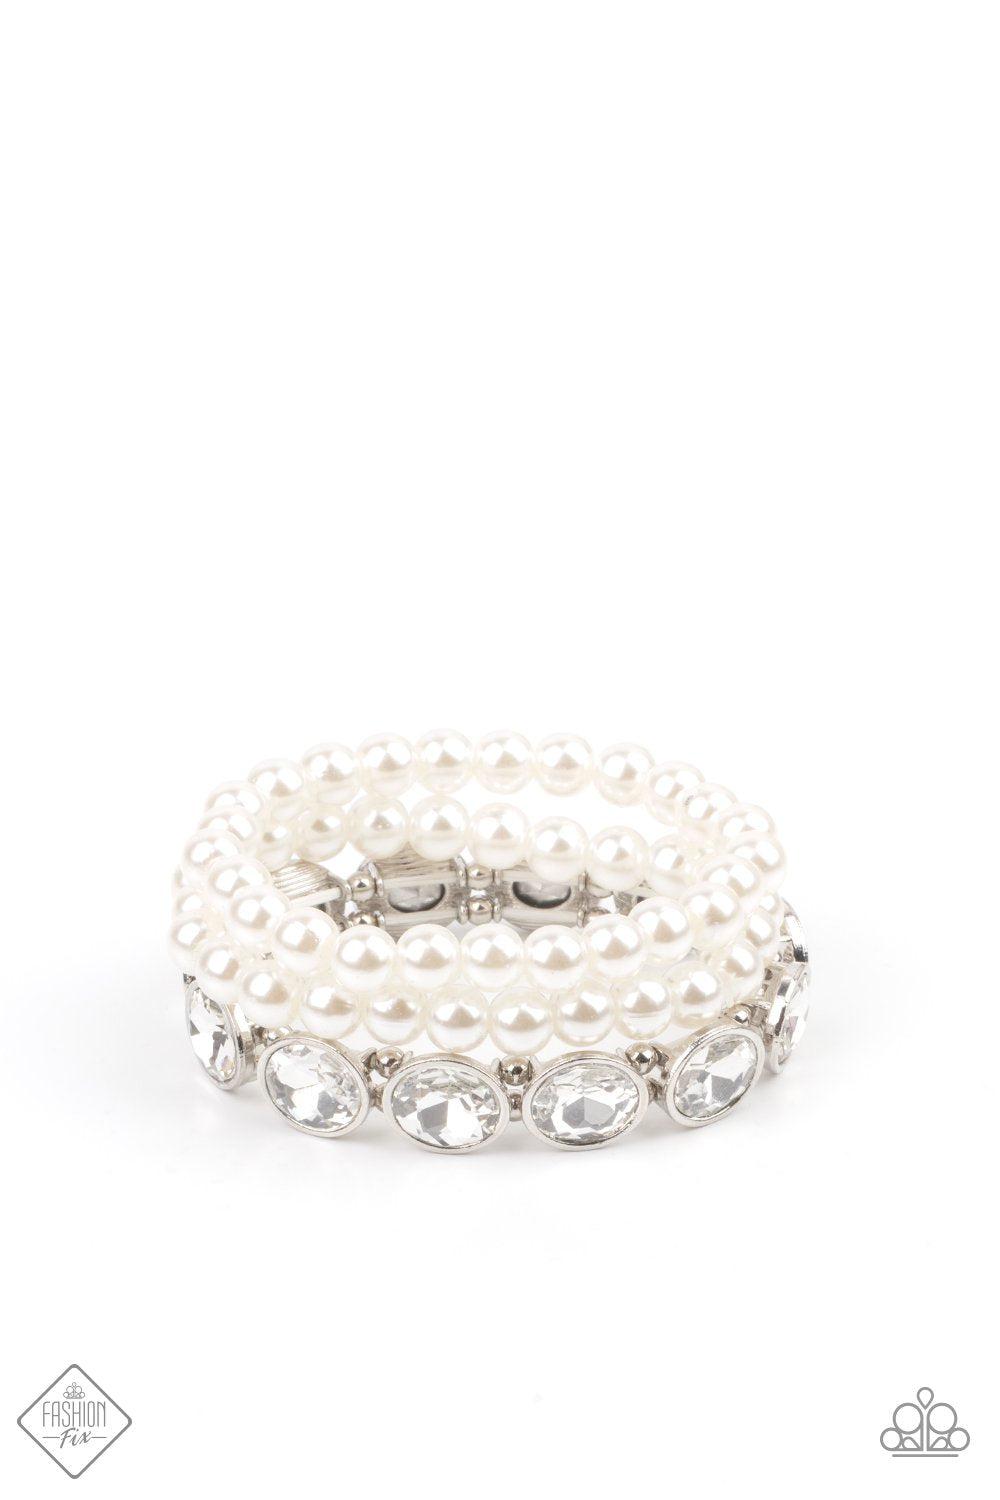 Flawlessly Flattering White Pearl and Rhinestone Stretch Bracelet Set - Paparazzi Accessories - lightbox -CarasShop.com - $5 Jewelry by Cara Jewels